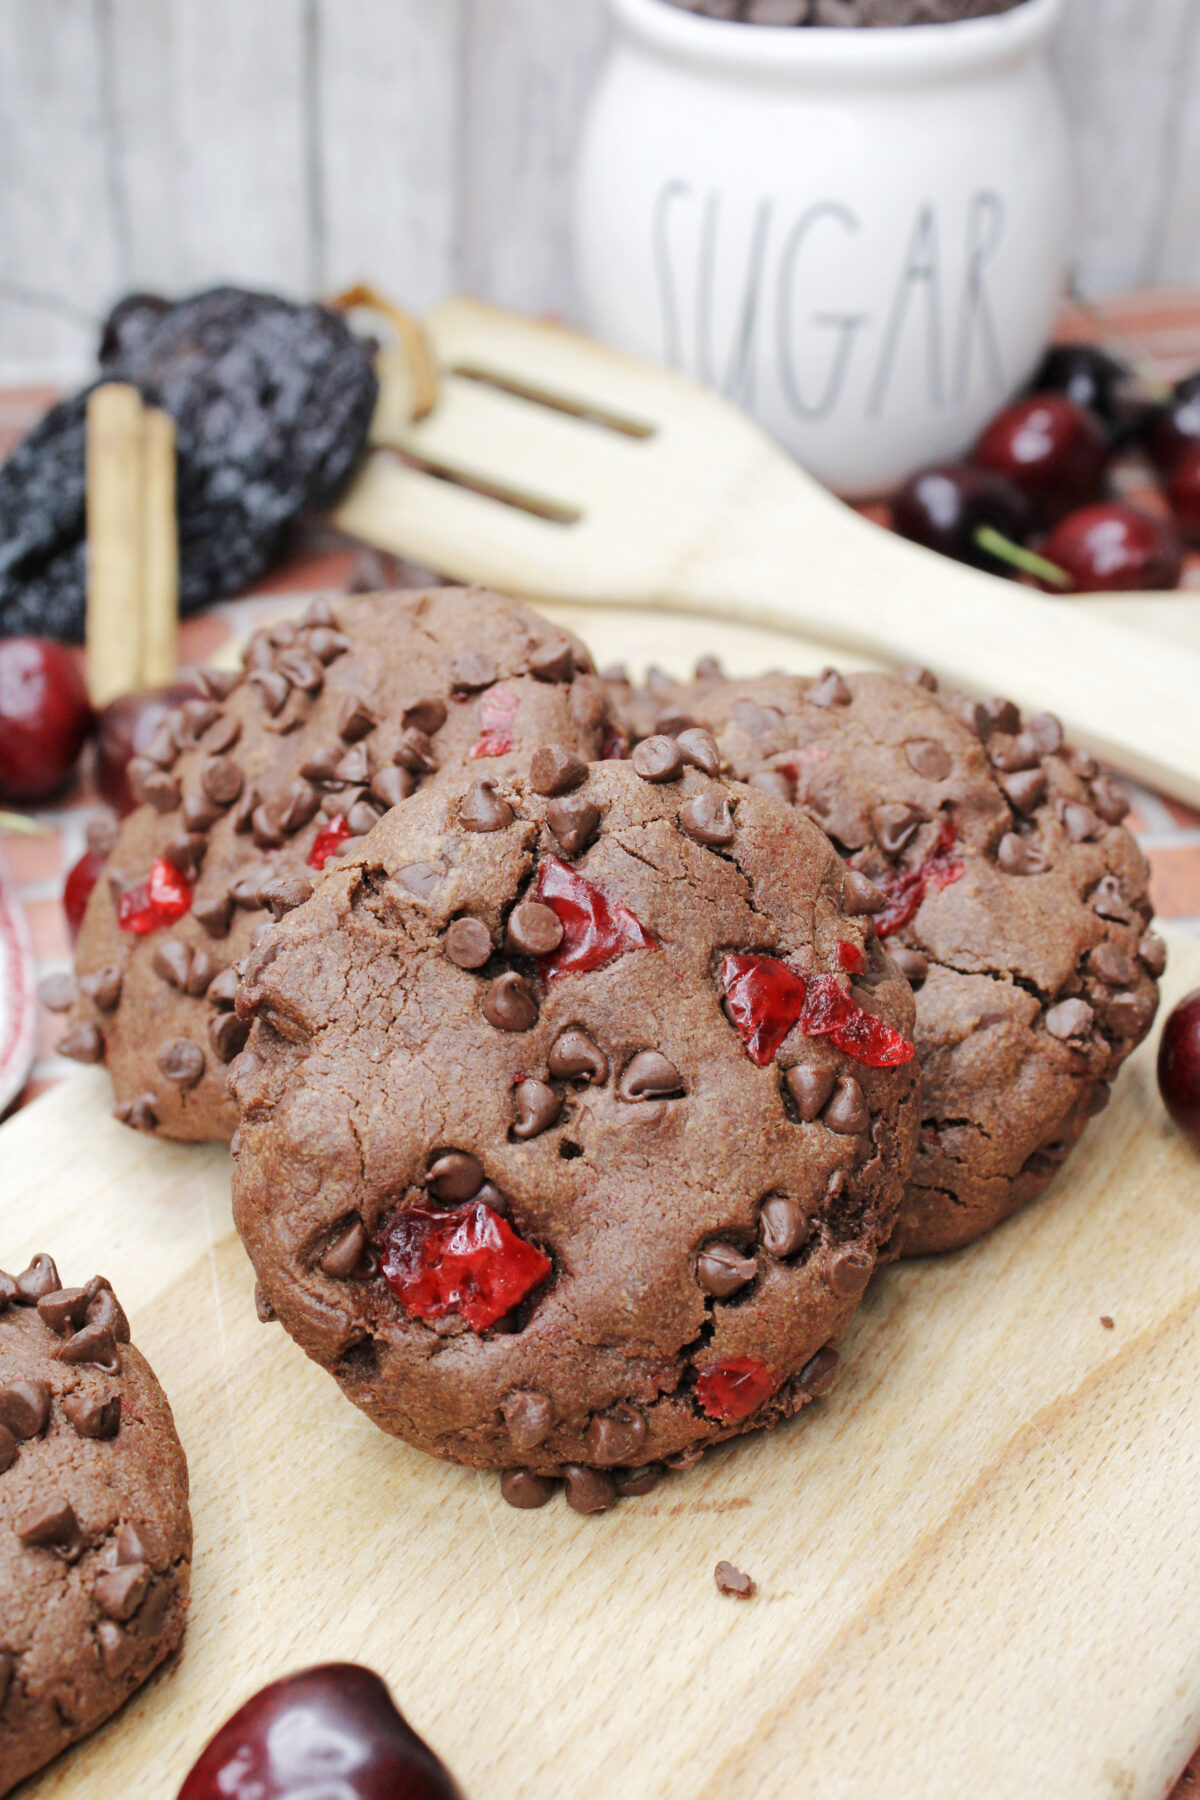 Try something special with this spiced chocolate cherry cookies recipe. It's the perfect balance of sweet, spicy, and oh-so-delicious!